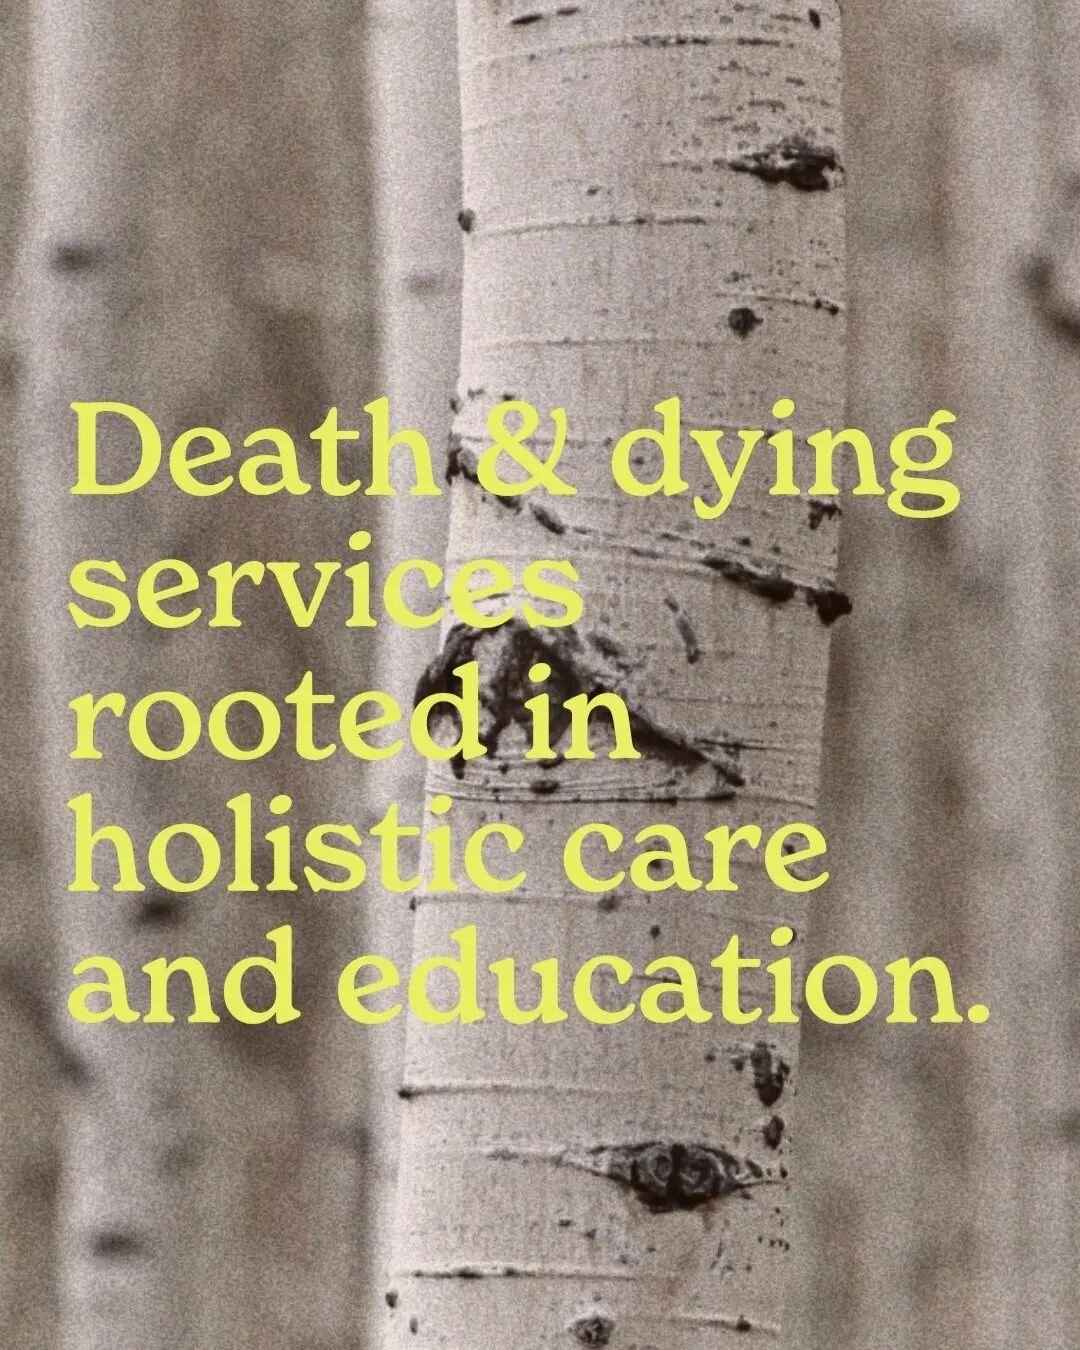 To better understand the current &quot;death revolution&quot; and what holistic Deathworkers are offering to their communities, head to my web page. It holds many free resources and some educational info for those who are; struggling with a loss, act